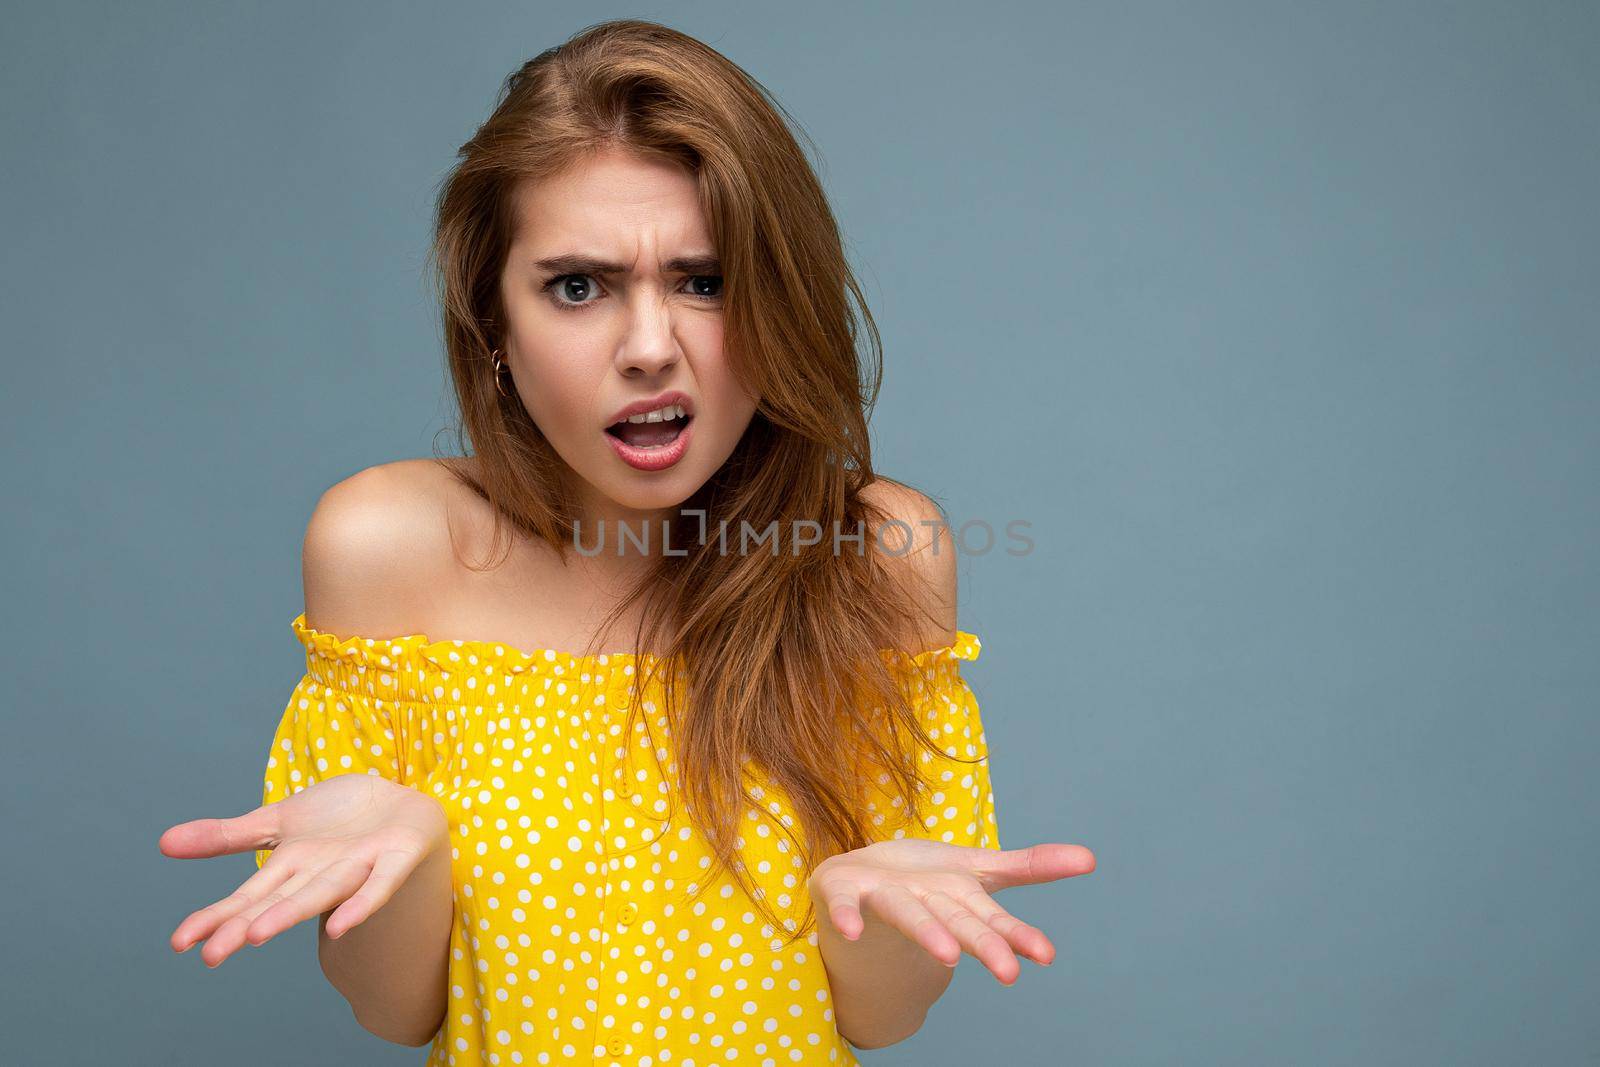 Photo of young cute delightful beautiful attractive angry asking dissatisfied unhappy dark blonde woman with sincere emotions isolated on blue background wall with copy space for text wearing stylish yellow dress.